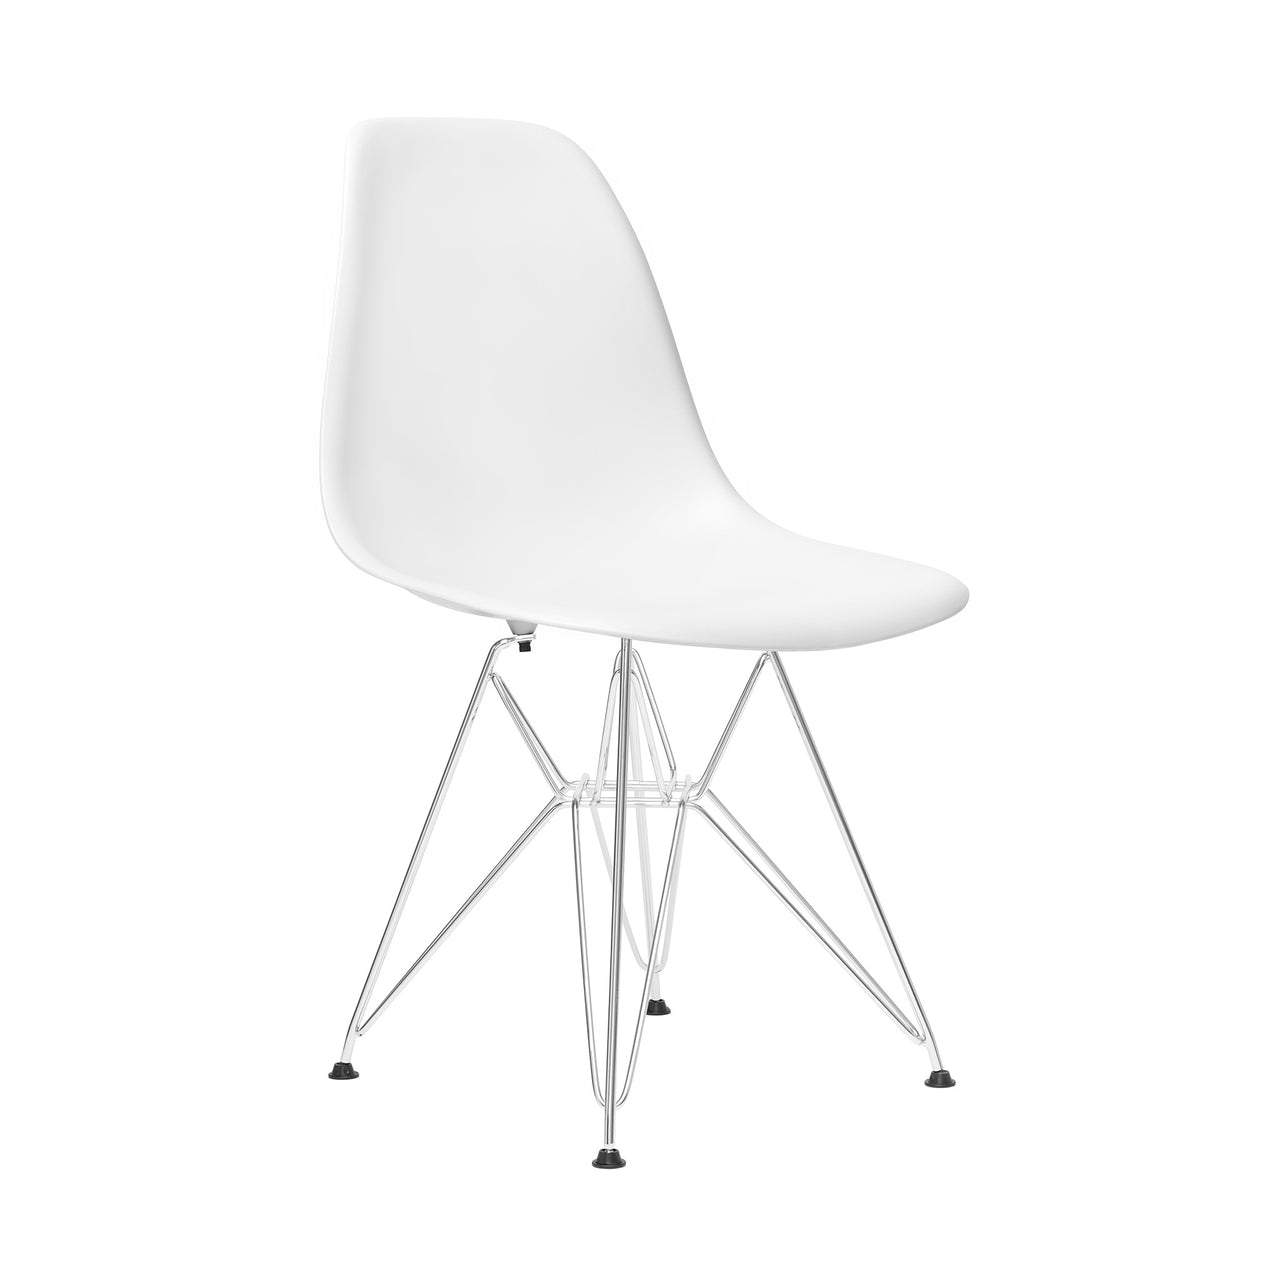 Chelsea Eiffel DSR Side Chairs - Set of 2 (White)